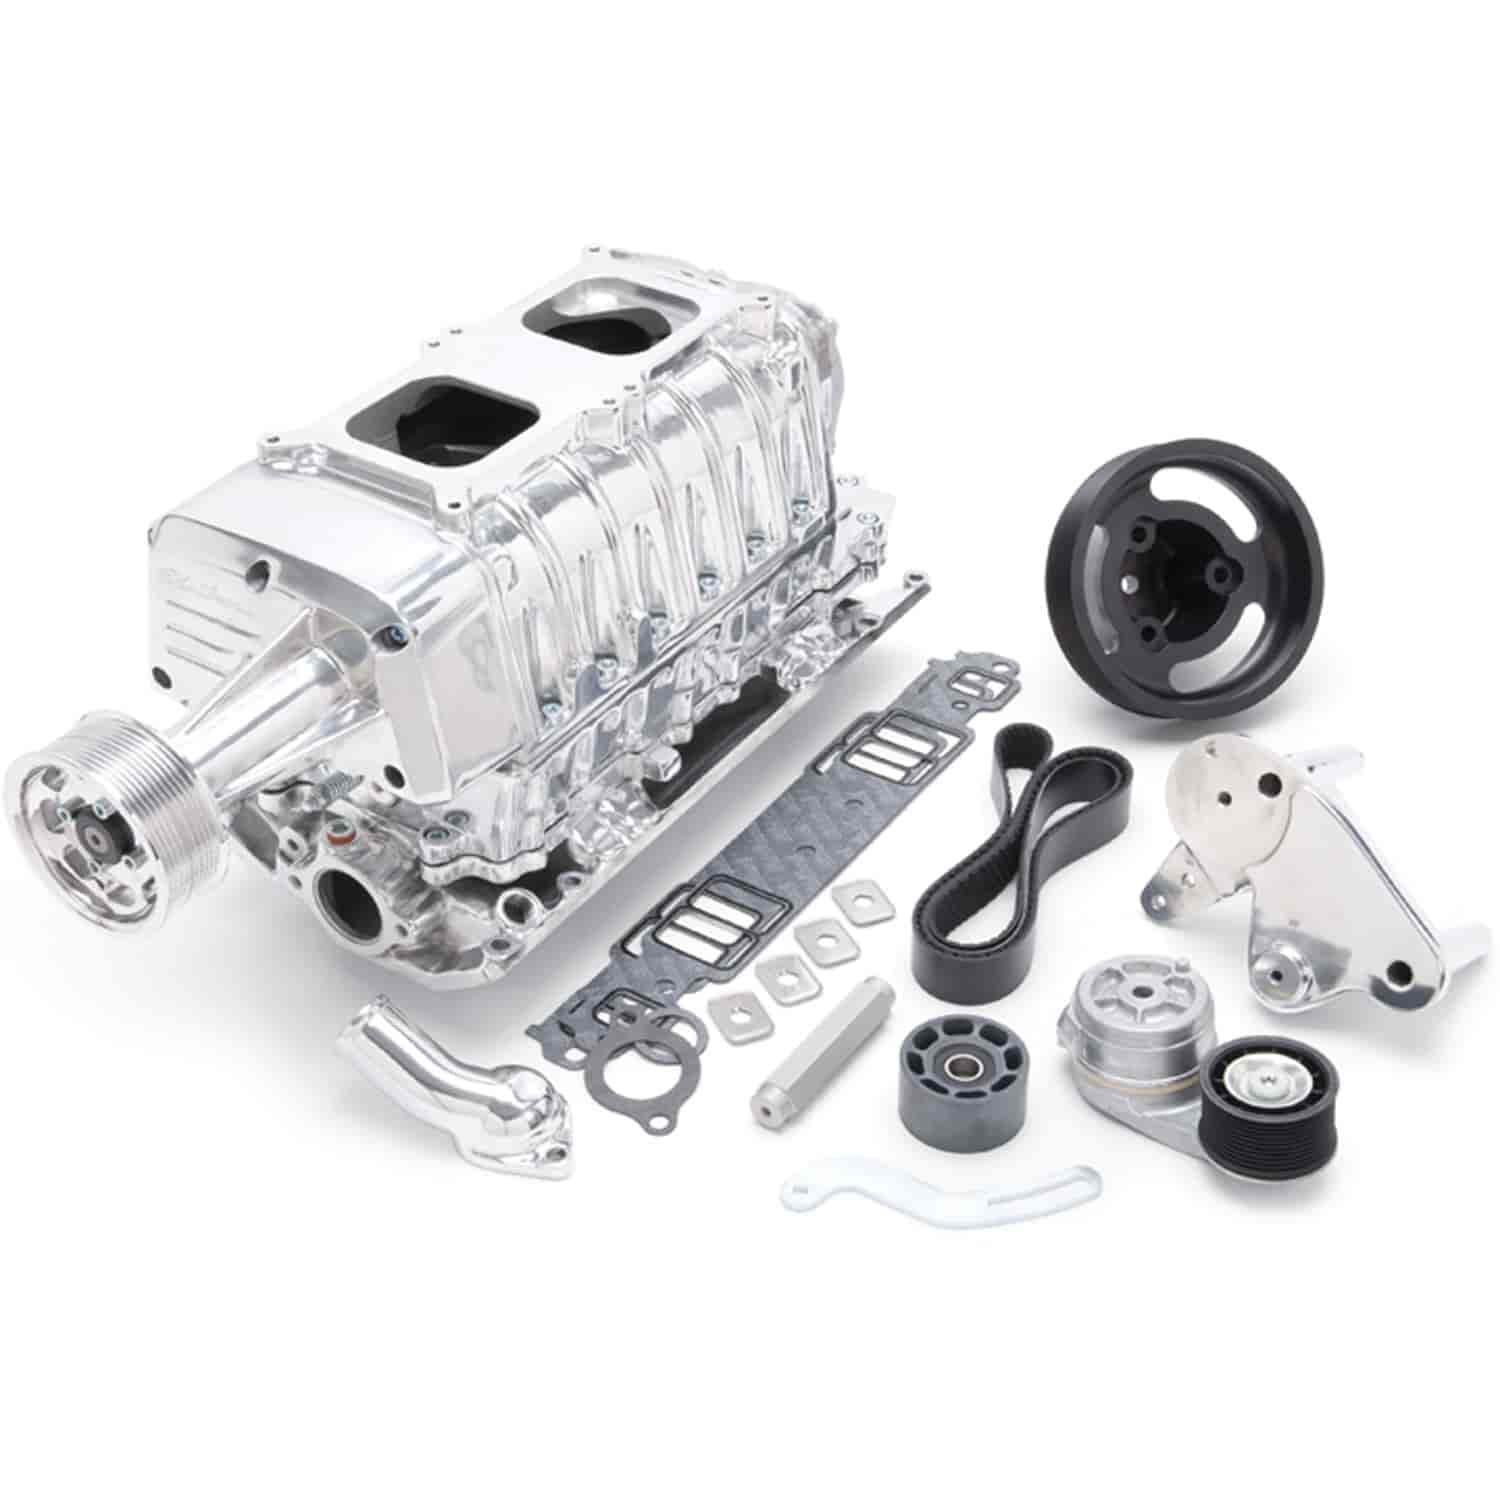 E-Force Enforcer RPM Dual Quad Polished Supercharger Kit for Small Block Chevy with Vortec Heads